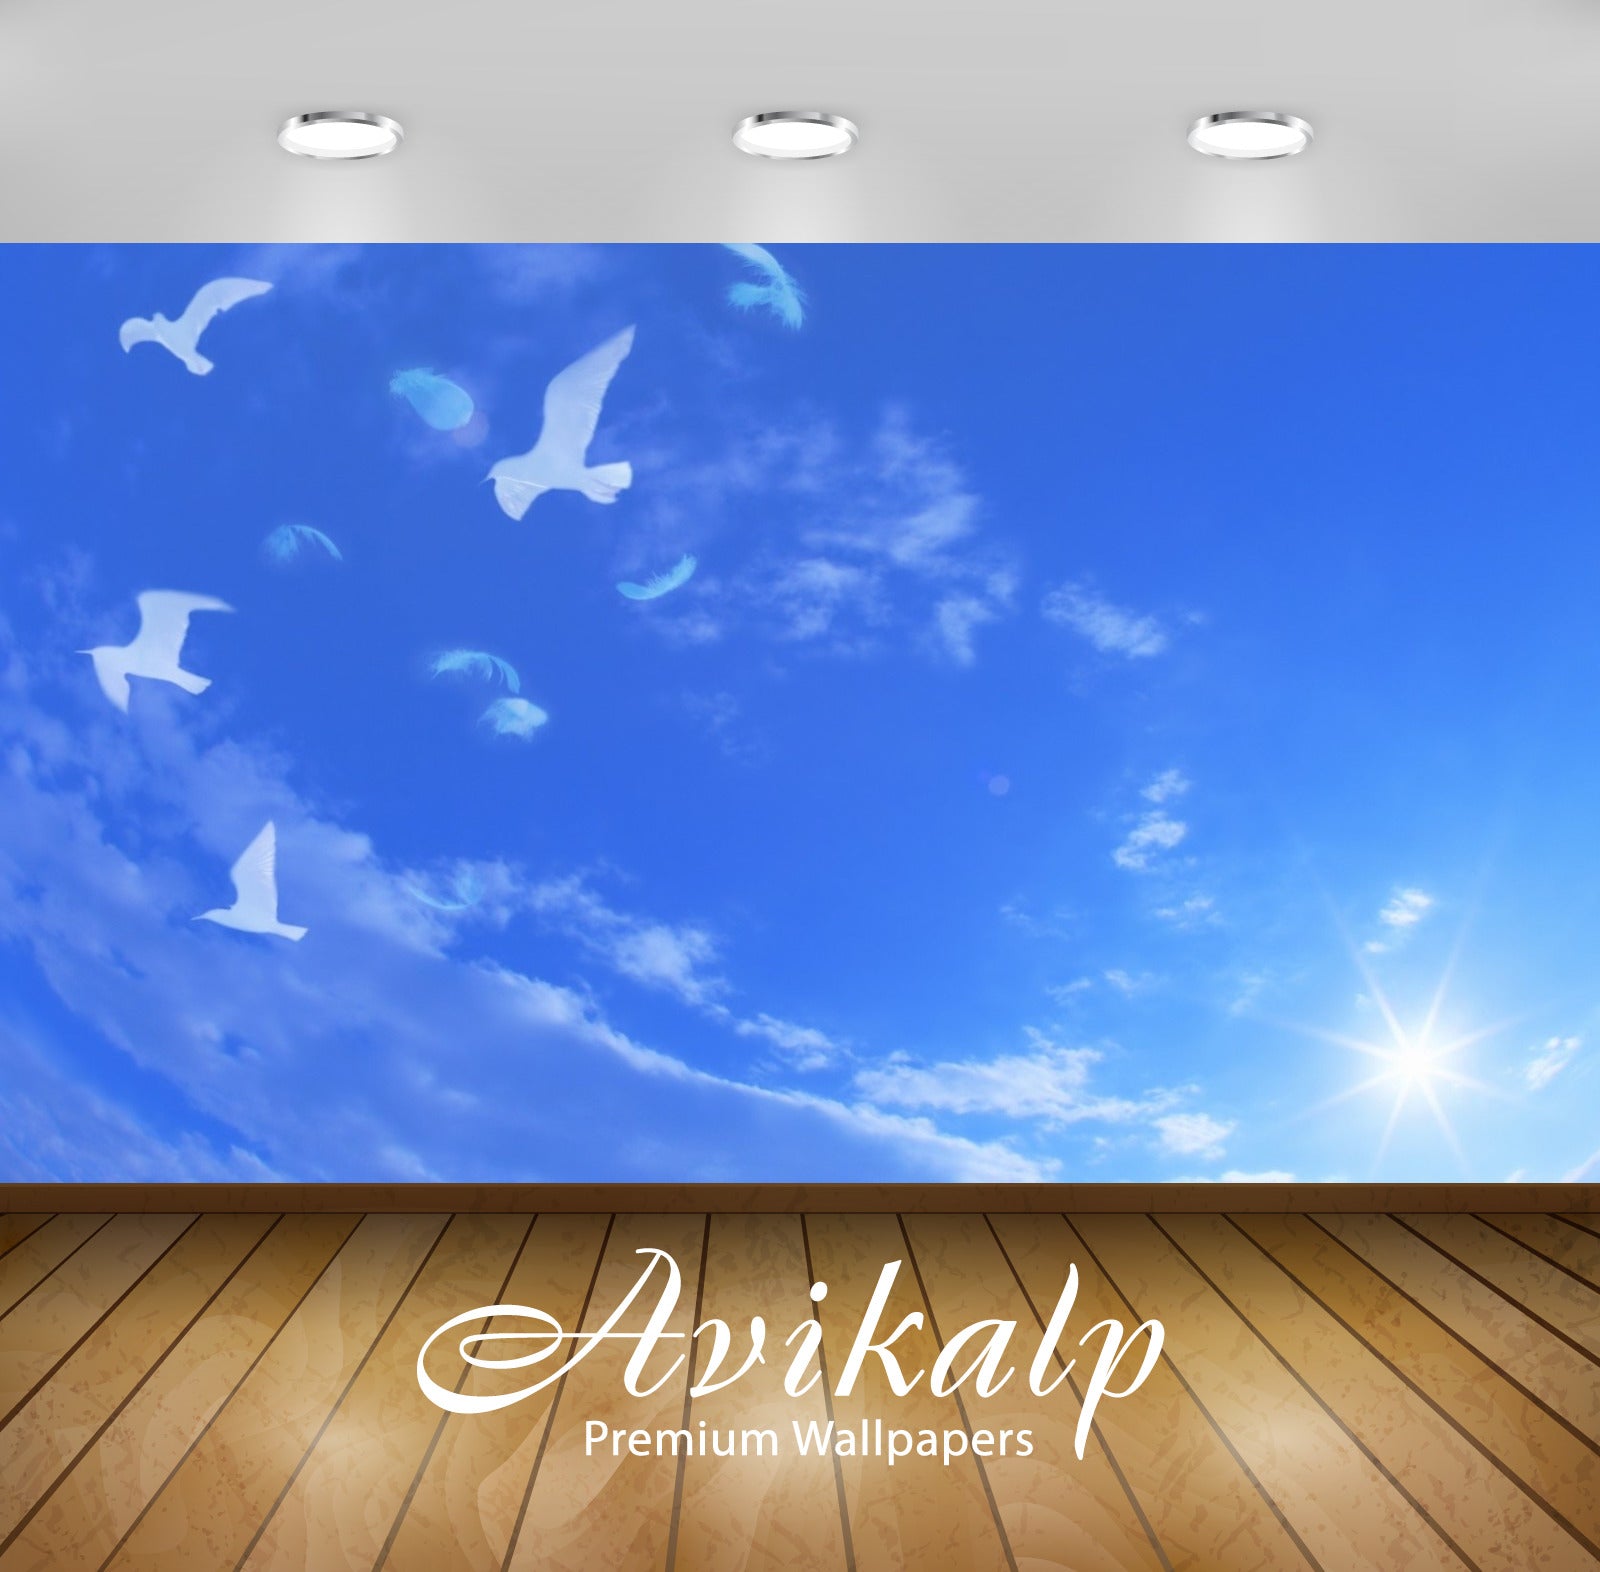 Avikalp Exclusive Awi1450 Sky Bird Full HD Wallpapers for Living room, Hall, Kids Room, Kitchen, TV